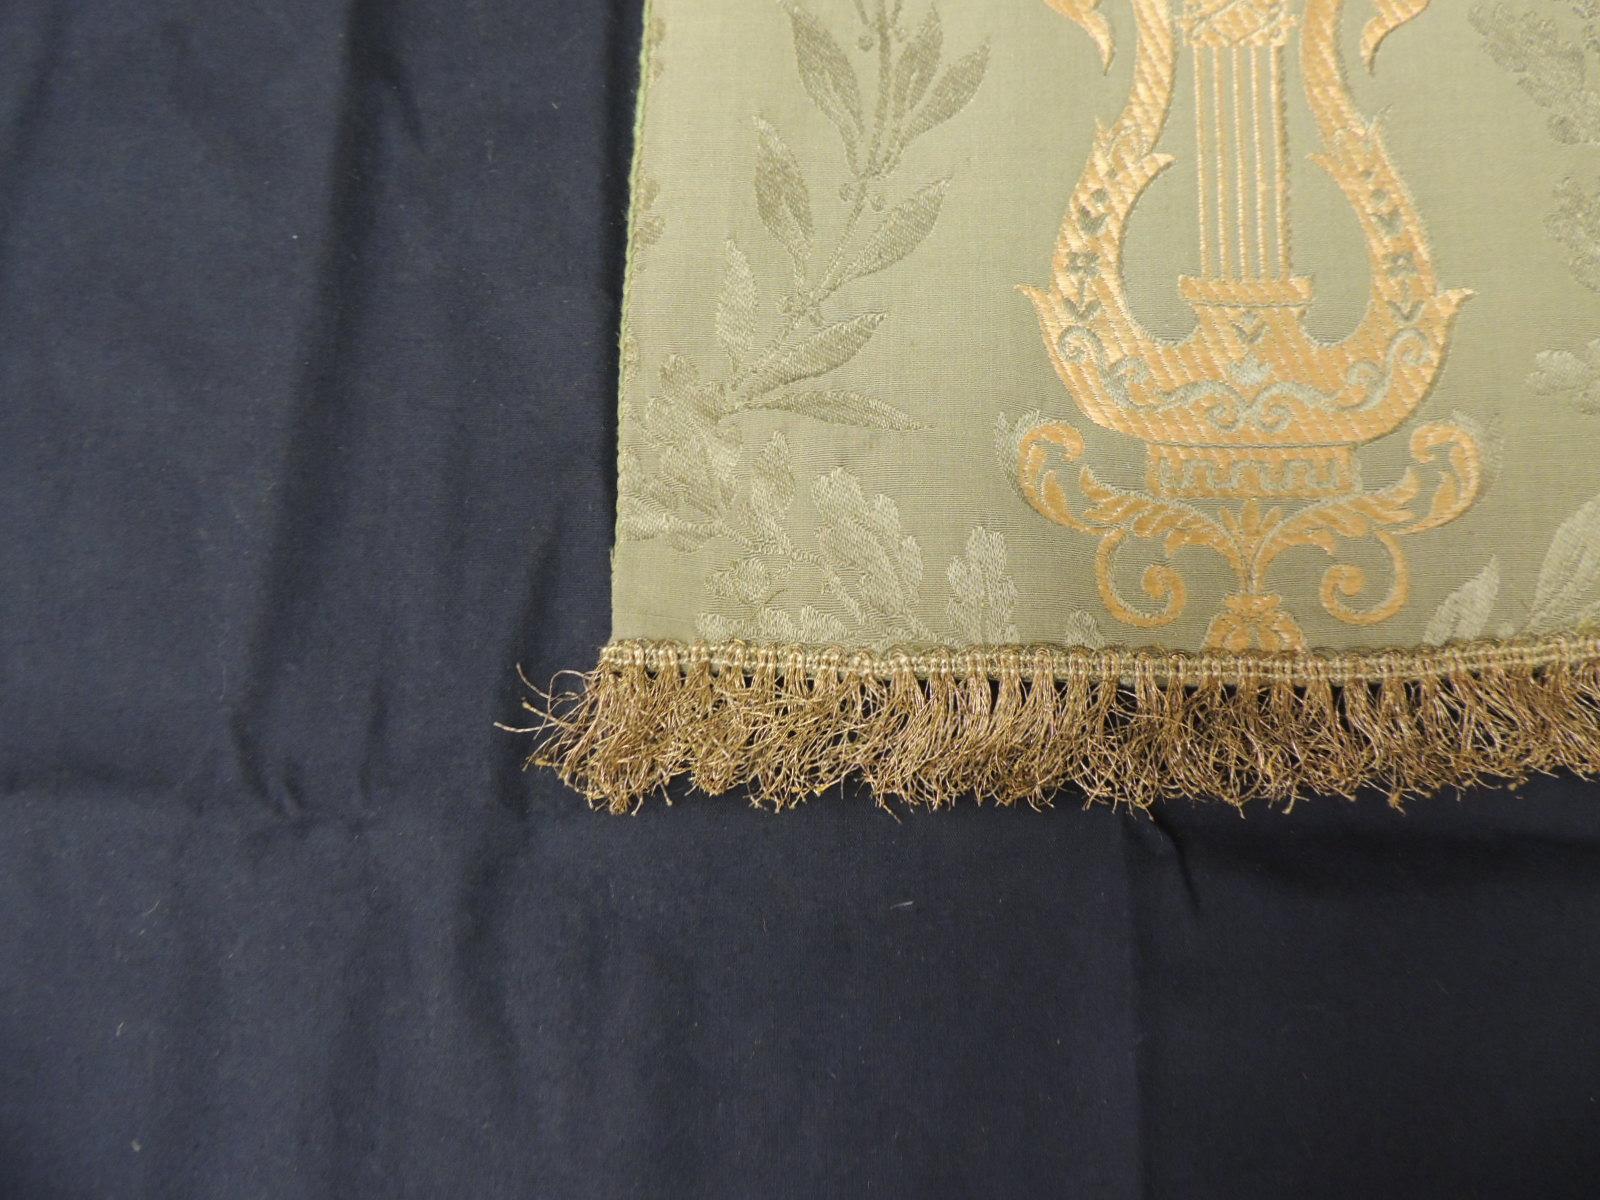 Antique Italian green and gold silk brocade textile.
Depicting vines and harps with small fringe trim at the bottom and satin green backing.
Sold as is.
Ideal for the back of a chair, to frame or to make a pillow.
Size: 17